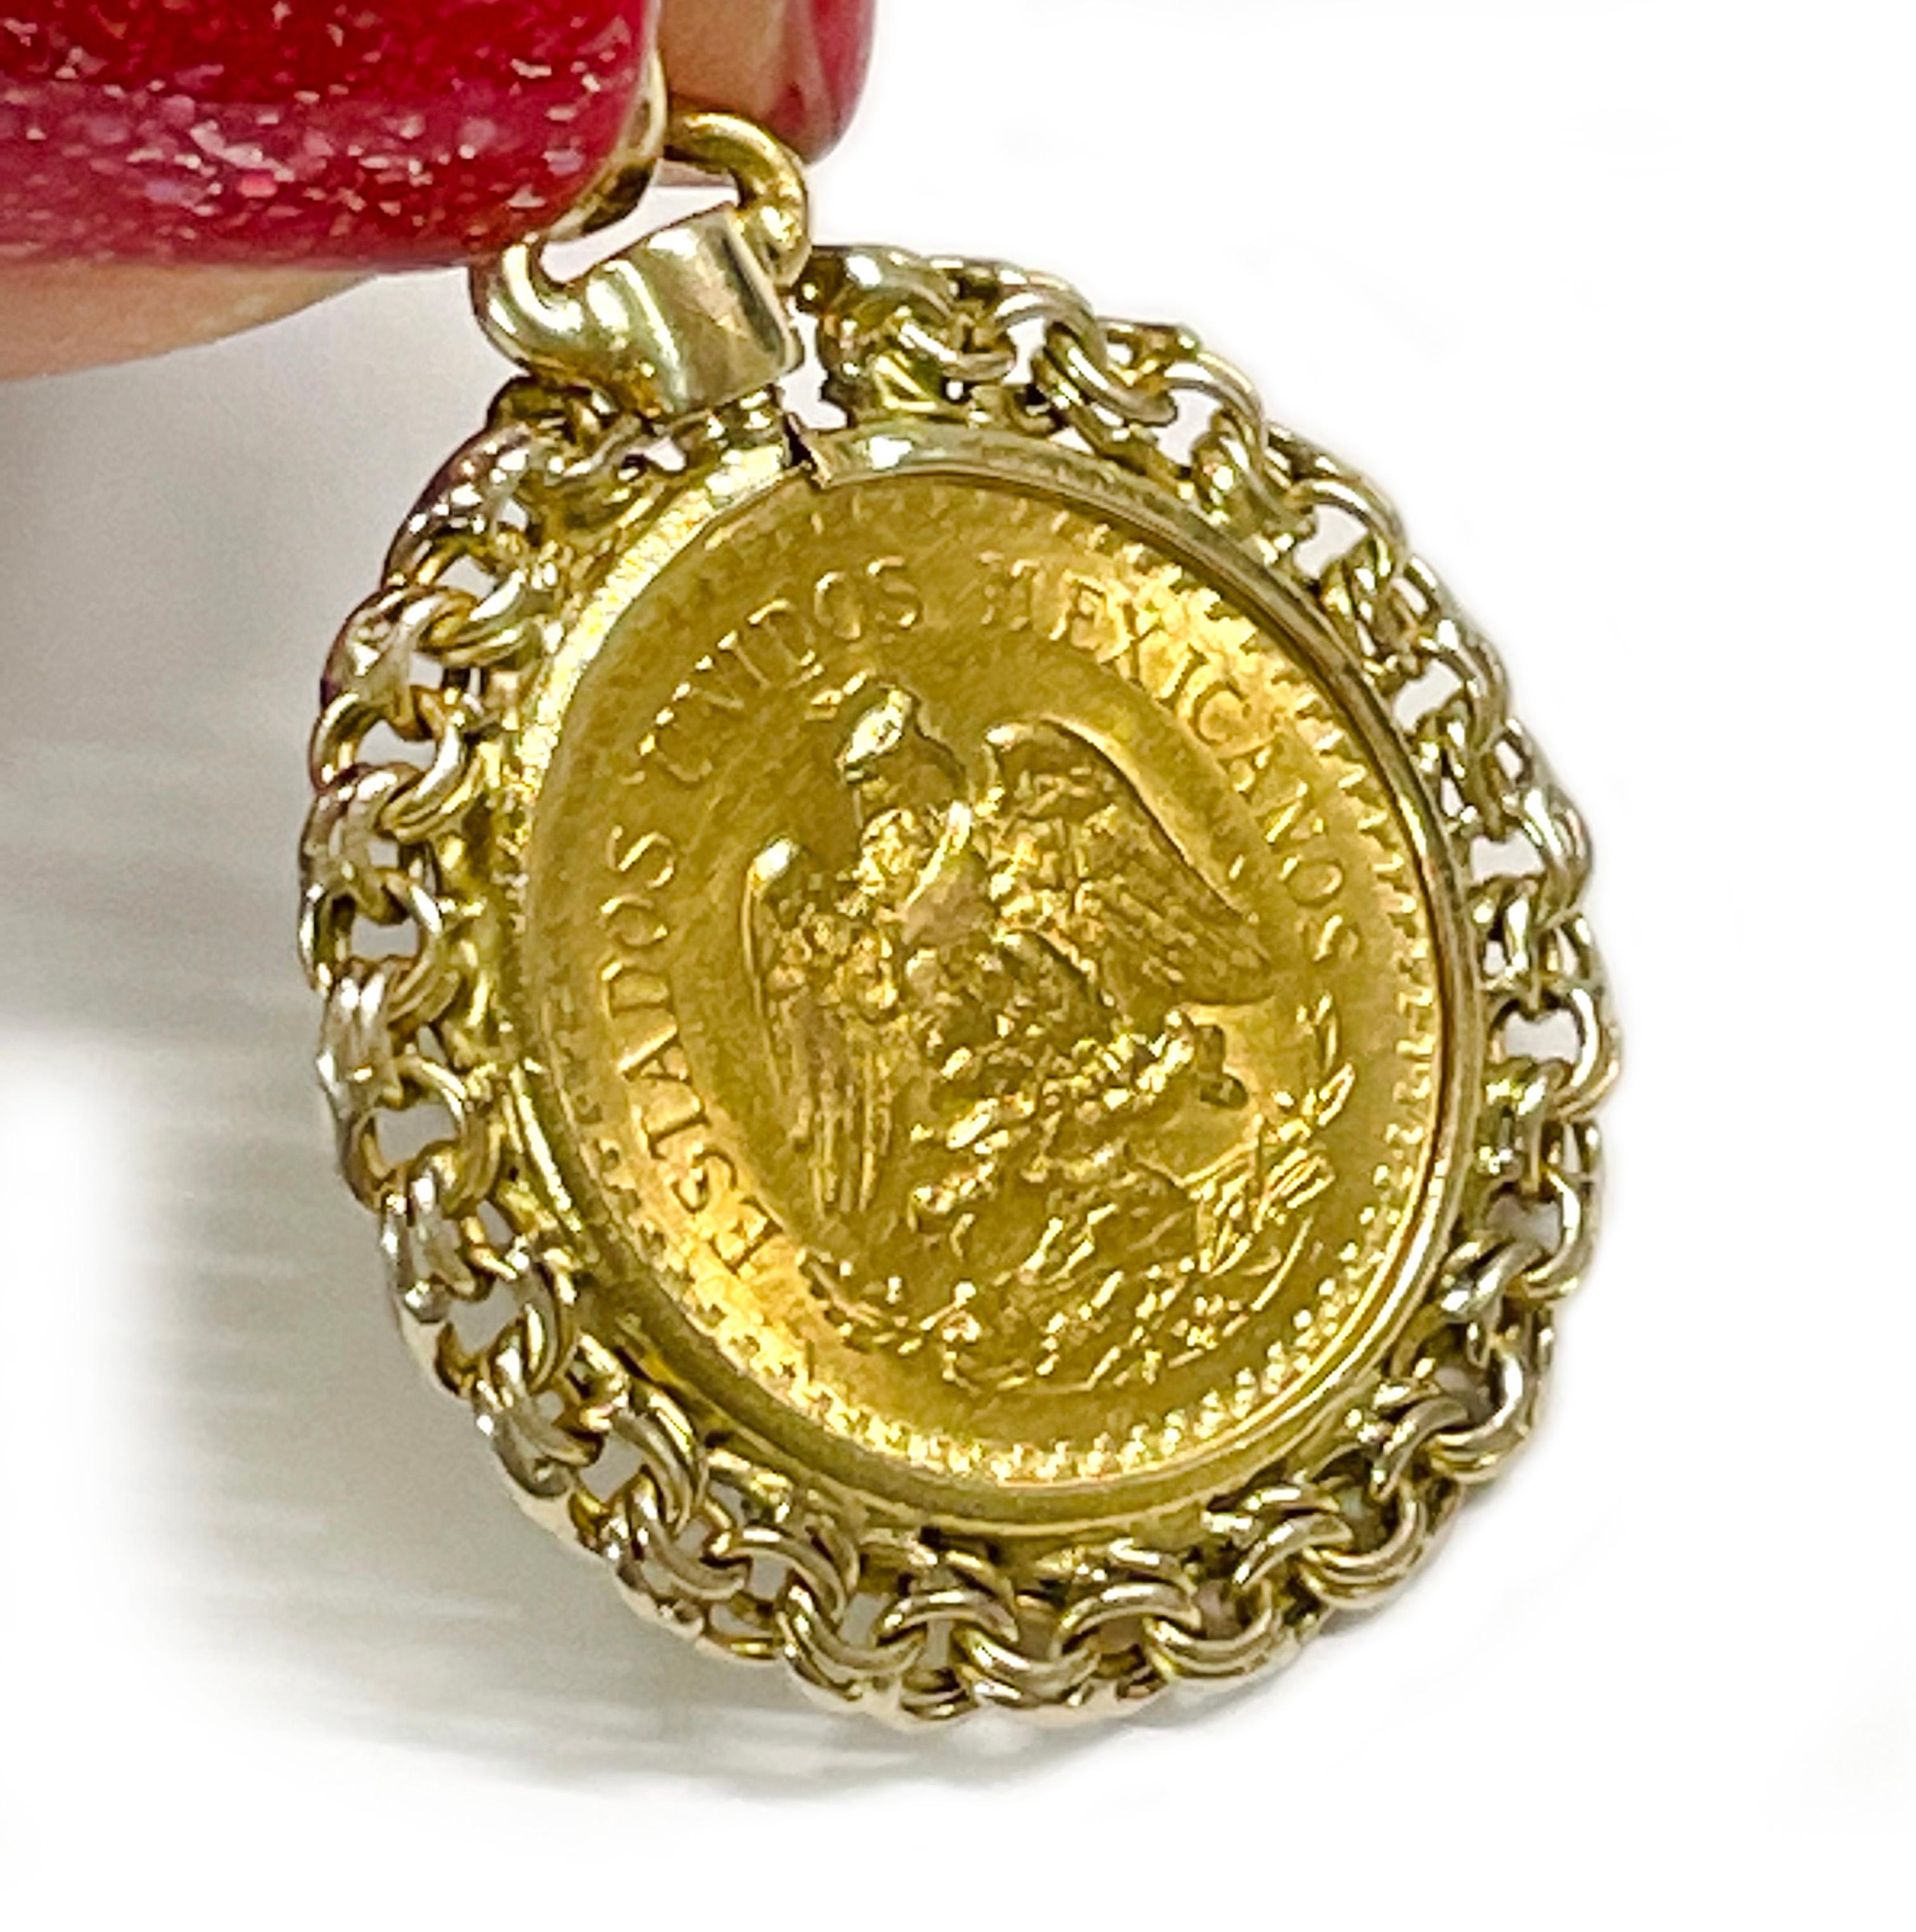 1945 Mexican Dos Y Medio Peso Coin Pendant. One side of the coin features the national coat of arms of Mexico (eagle with serpent/snake in its mouth) and reads Estatdos Unidos Mexicanos. The other side of the coin reads 